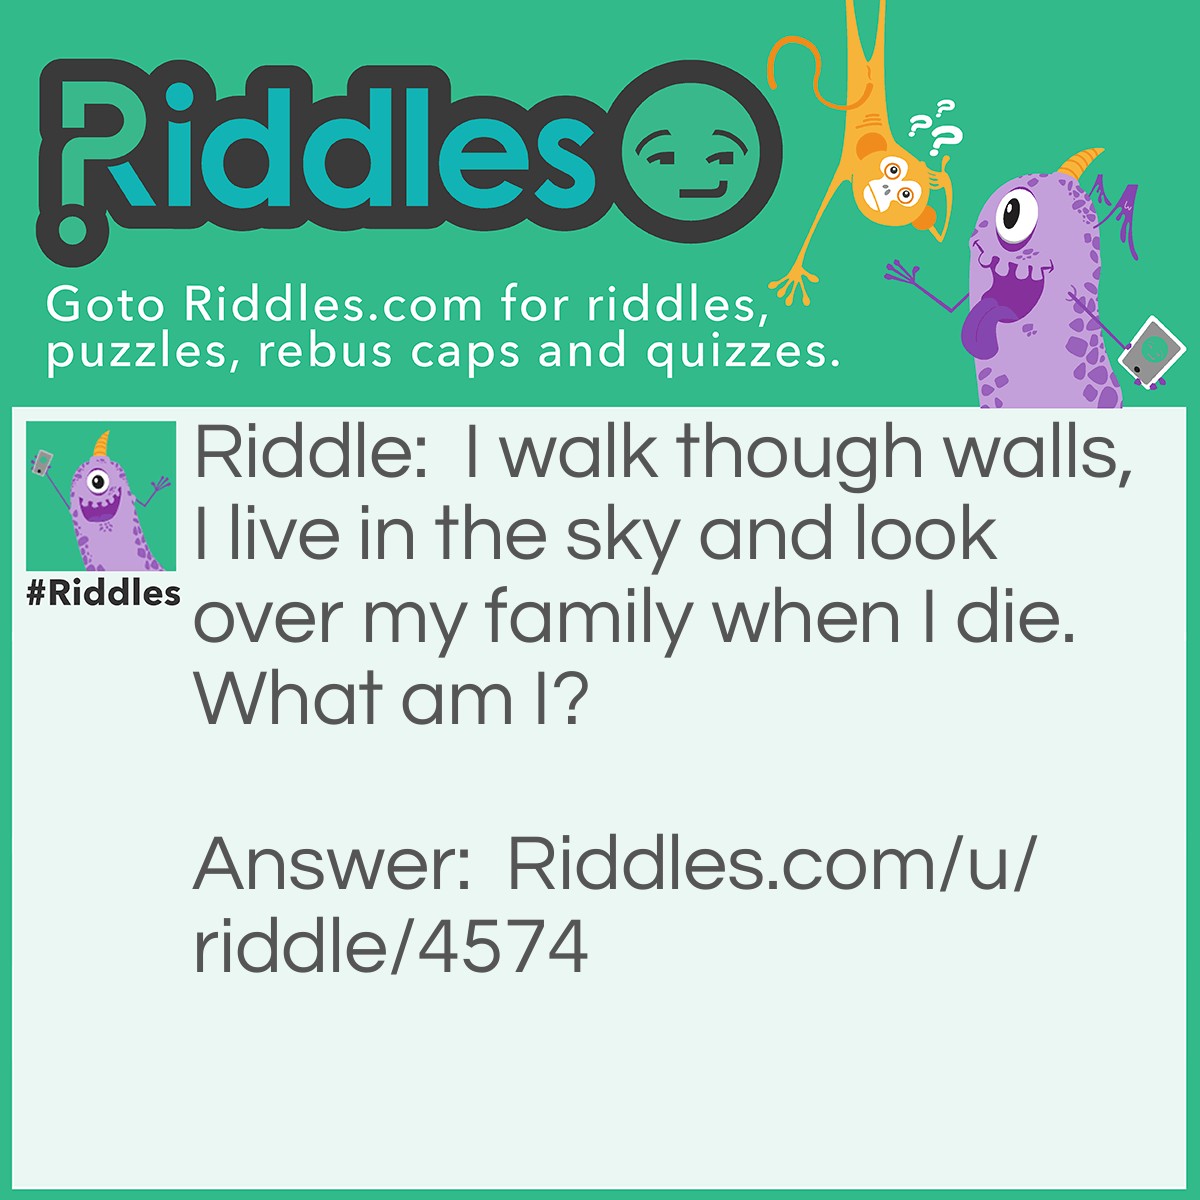 Riddle: I walk though walls, I live in the sky and look over my family when I die. What am I? Answer: A spirit.